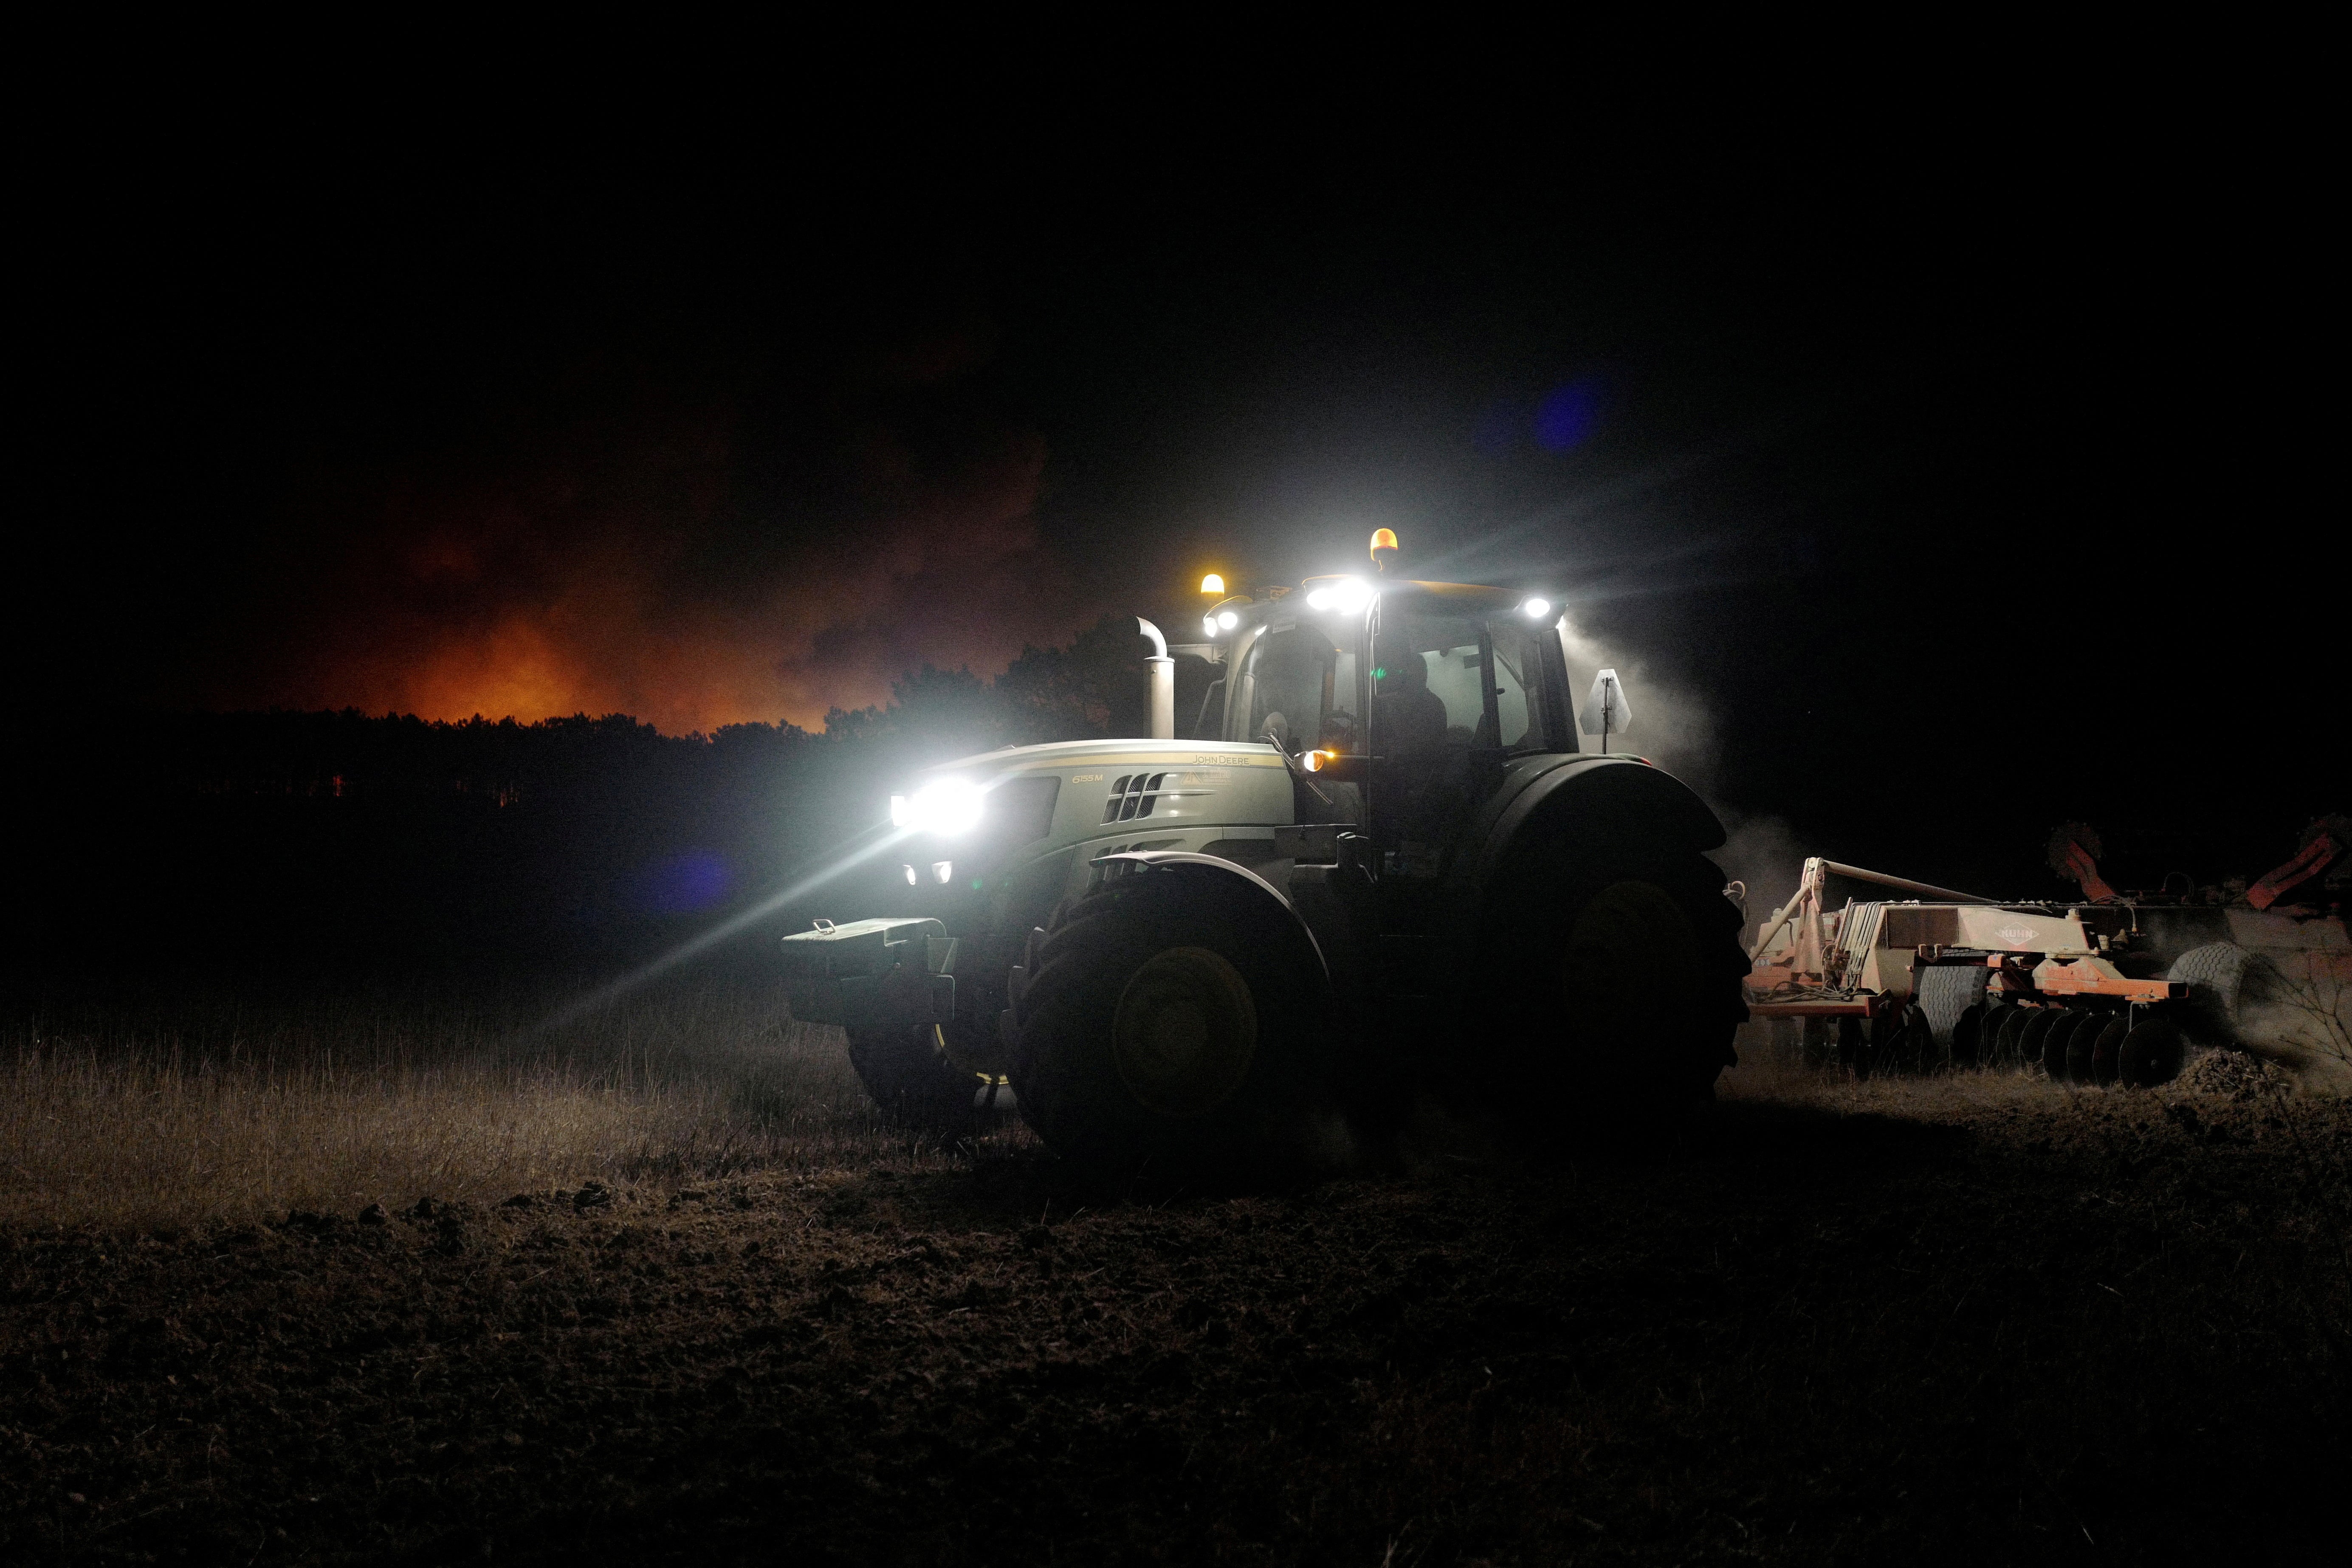 A tractor cleans up land during a wildfire in Aljezur, Portugal, 7 August